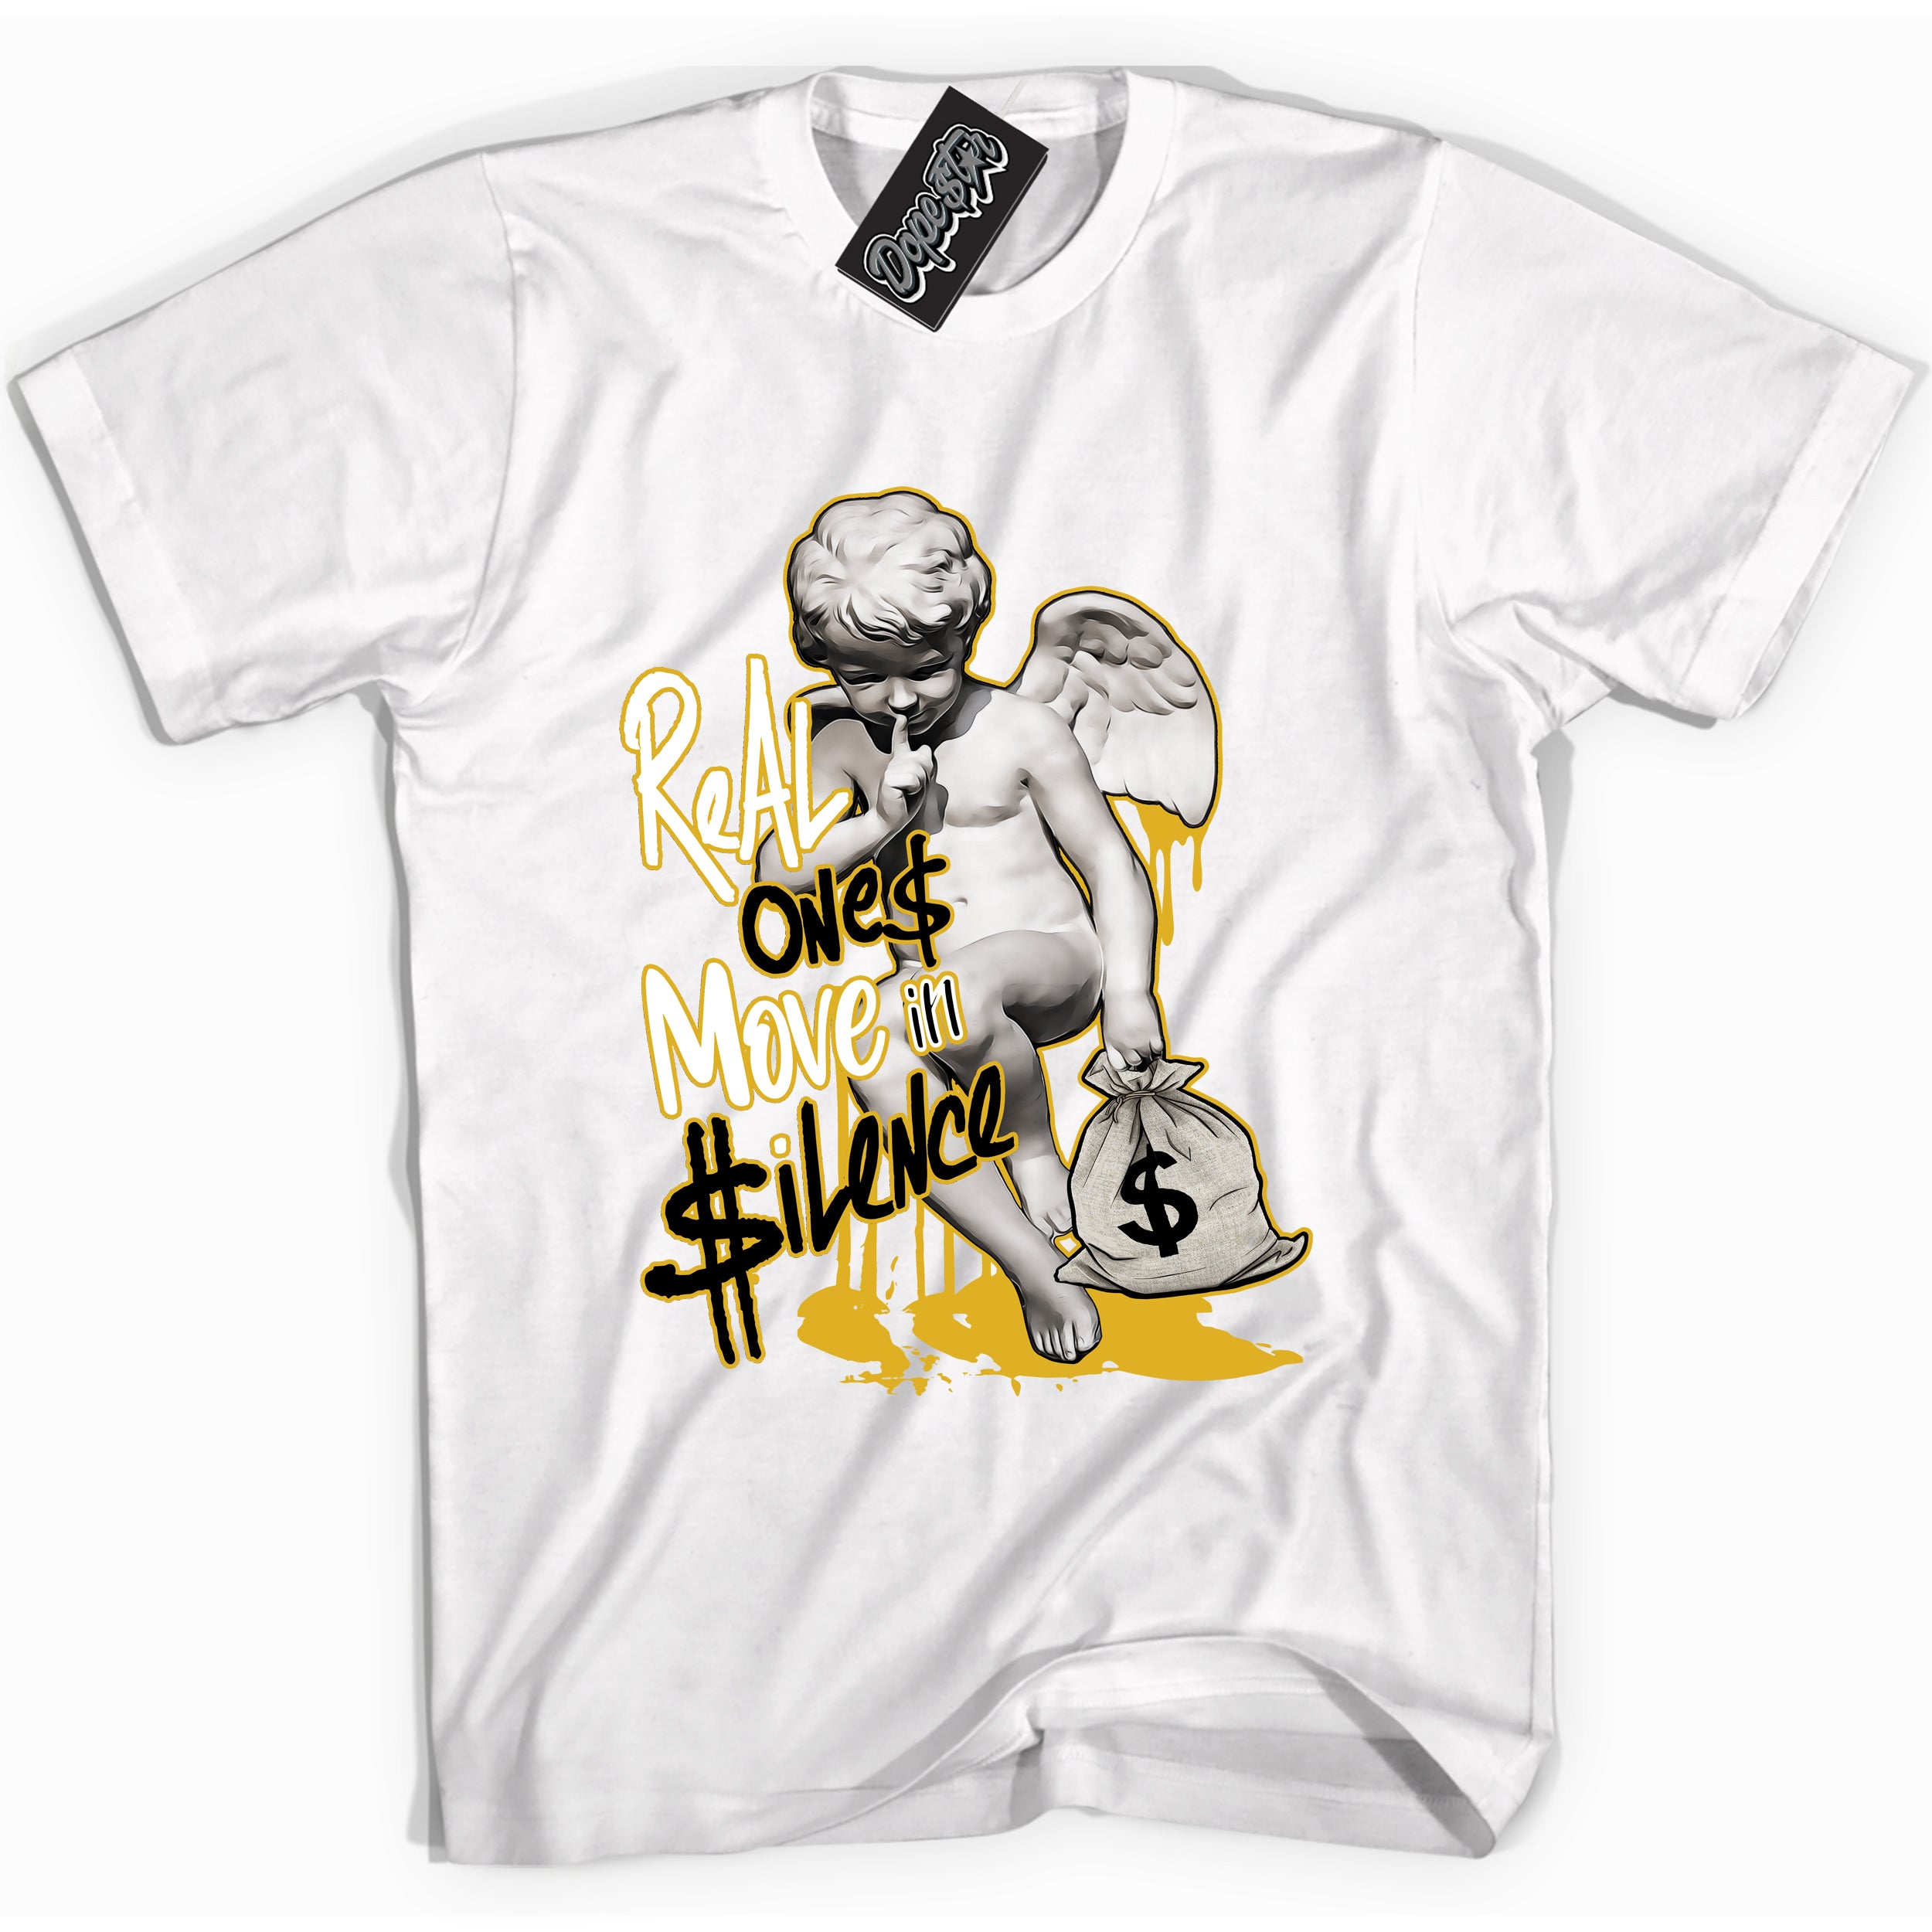 Cool White Shirt with “ Real Ones Cherub” design that perfectly matches Yellow Ochre 6s Sneakers.